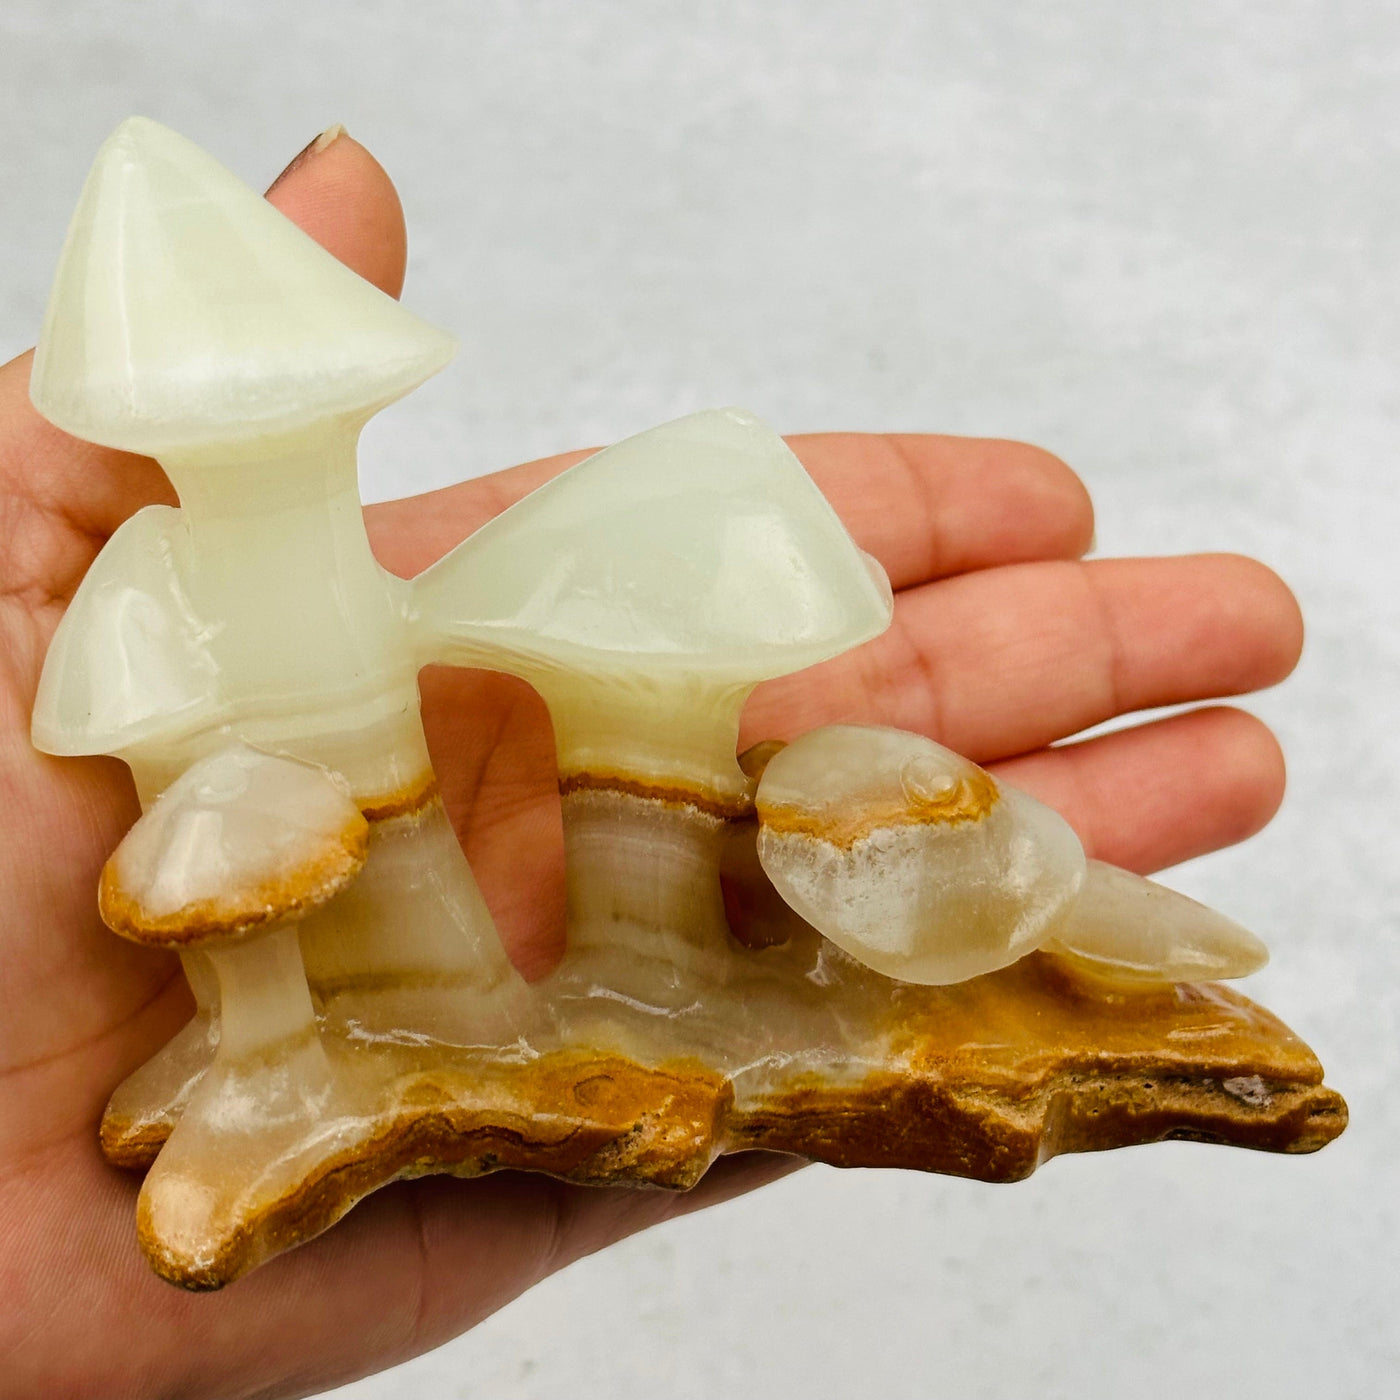 Calcite Crystal Mushroom Display in hand for size reference 